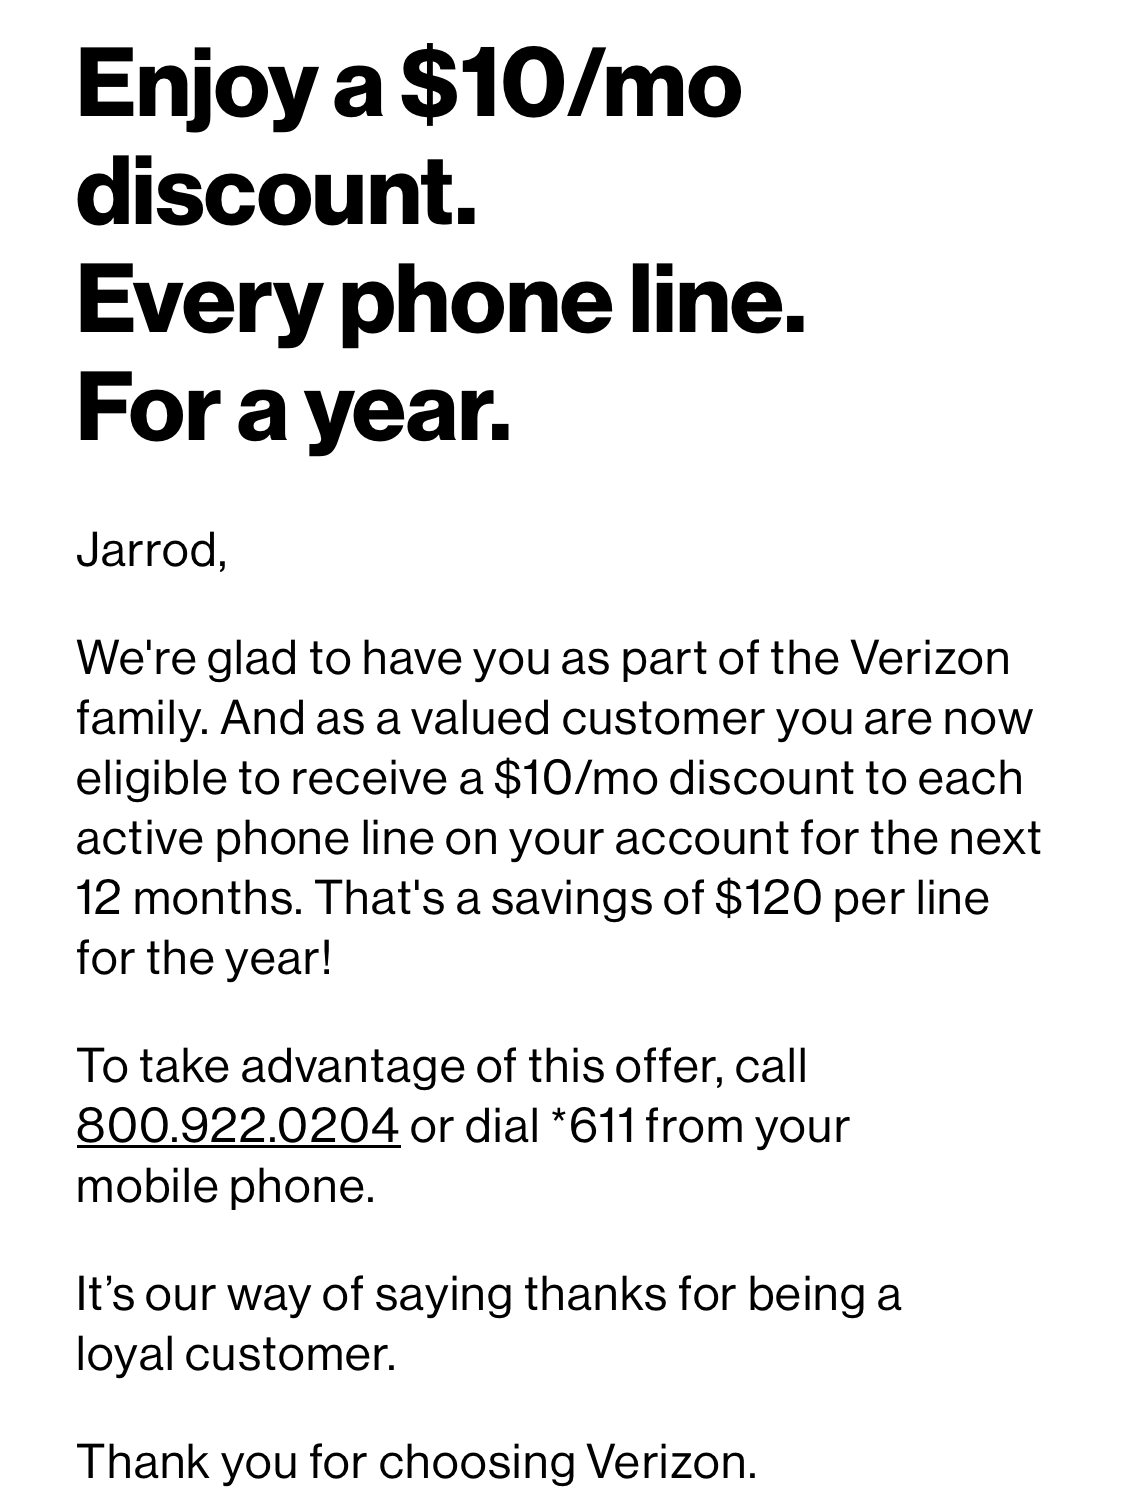 Text advertisement offers a $10/month discount on every phone line for a year to a person named Jarrod, expressing gratitude for loyalty to Verizon. Customer service numbers are provided.